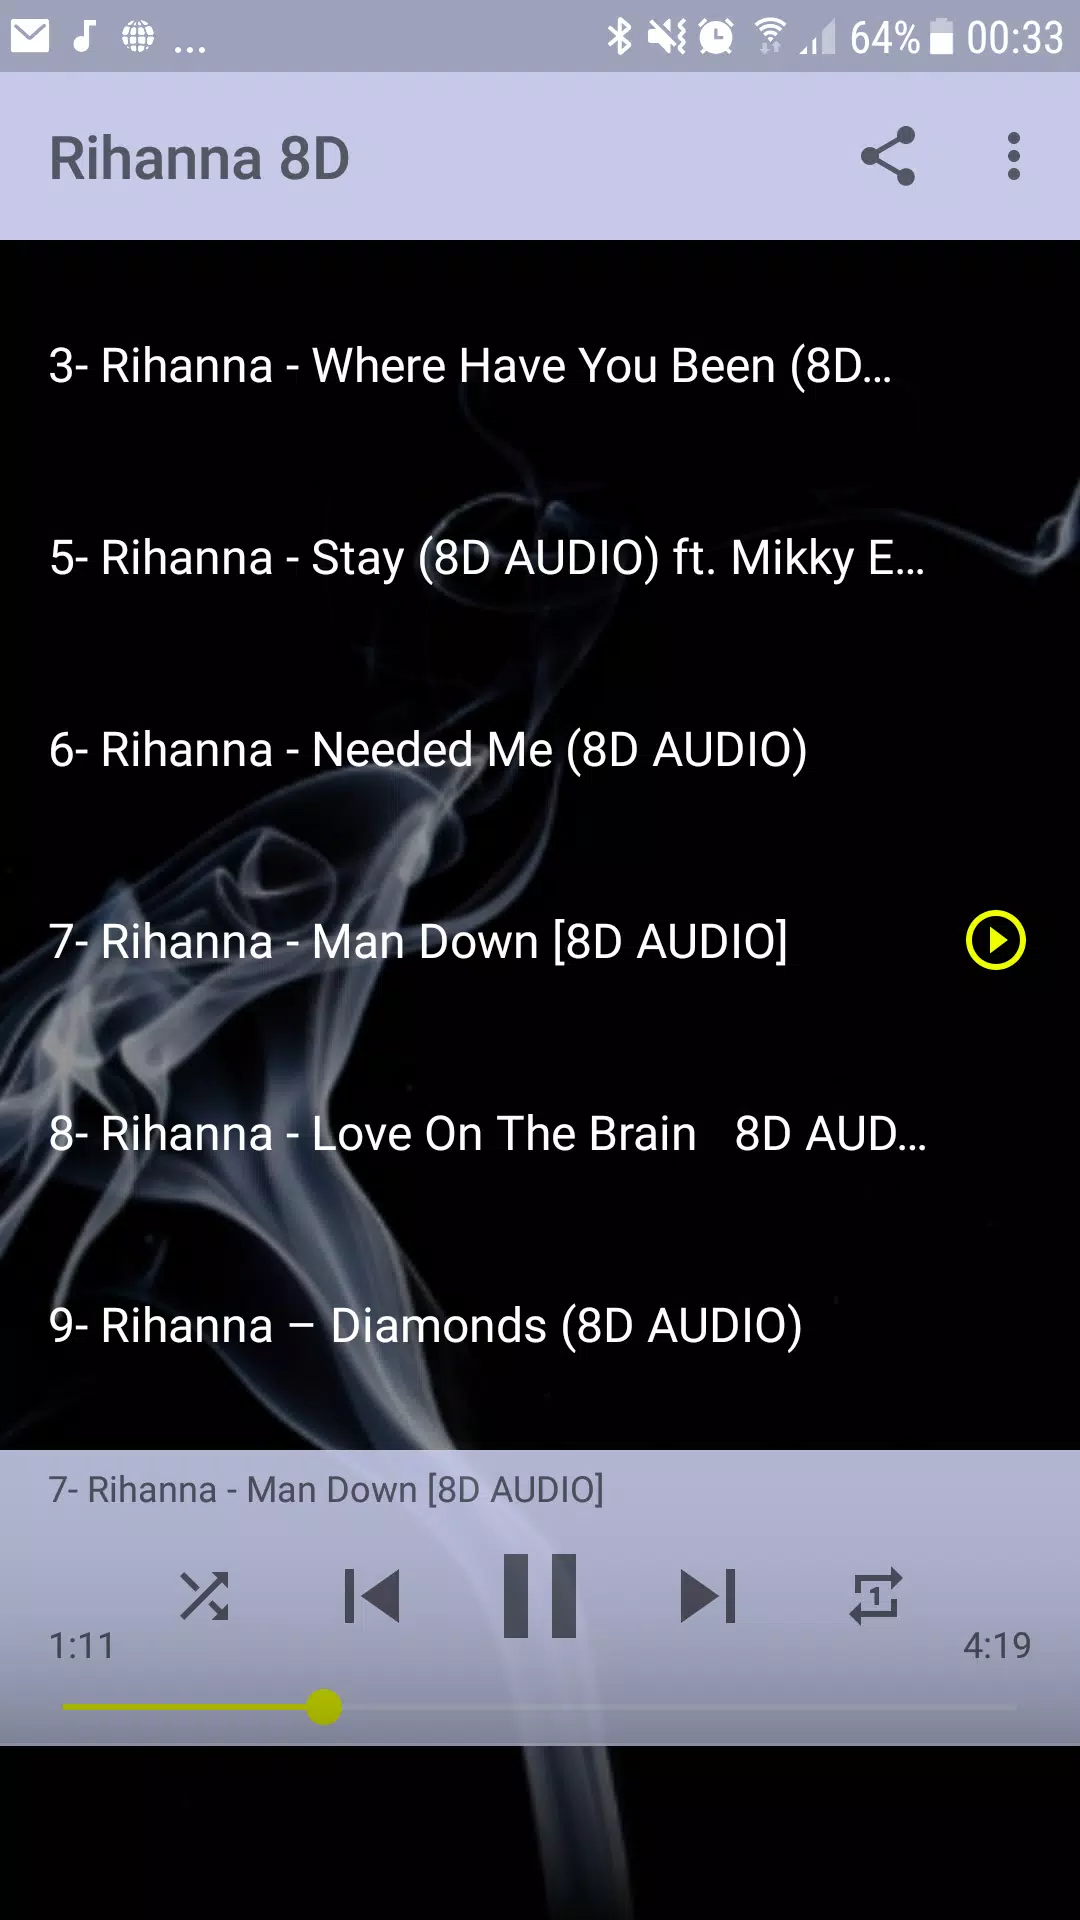 Rihanna 8D for Android - APK Download